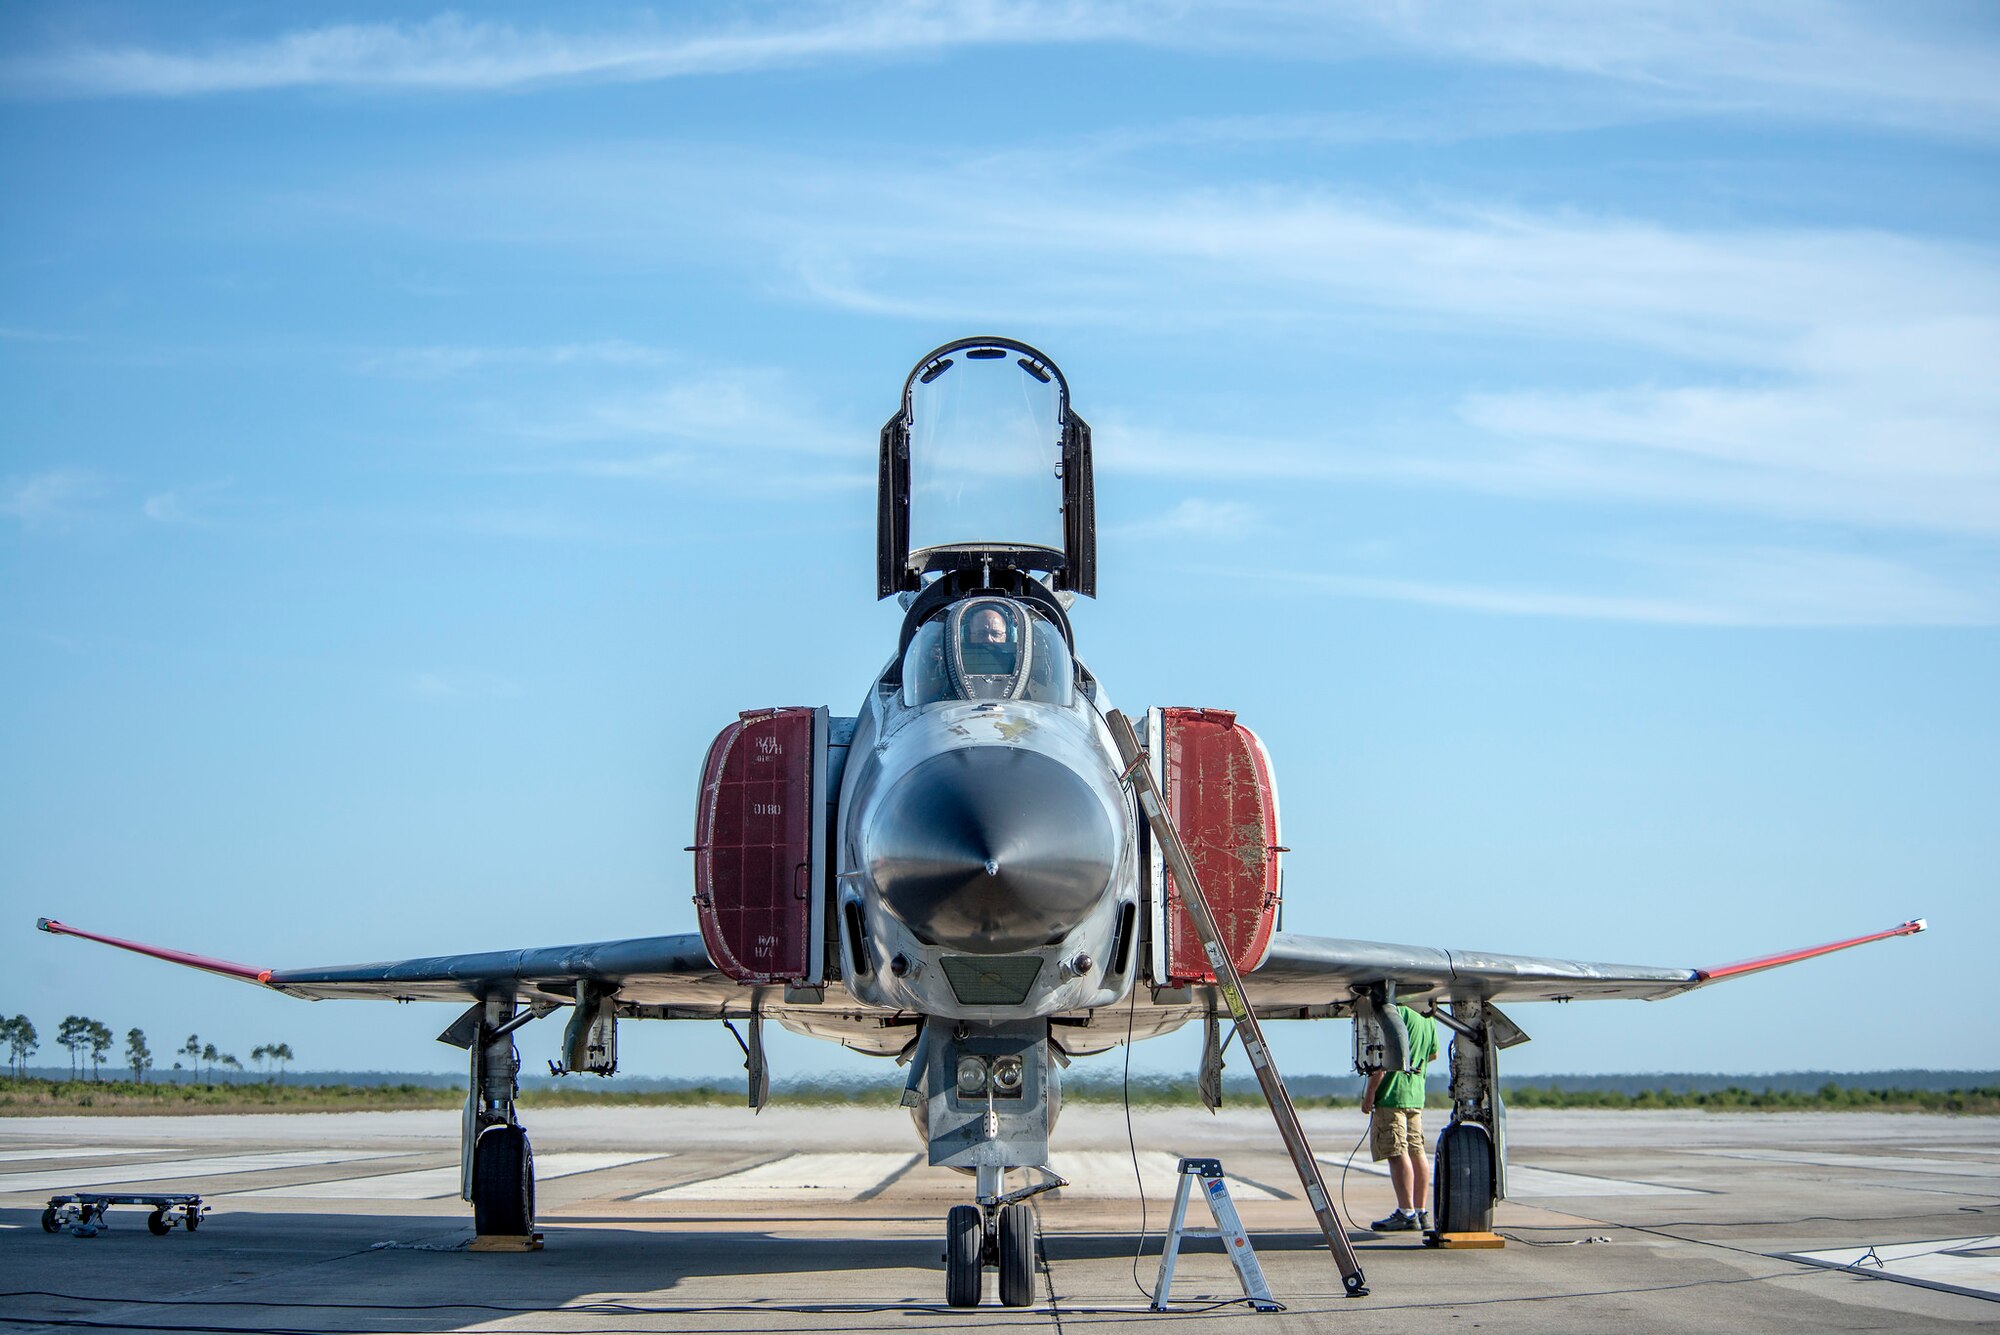 Since 1995, members of the 82nd Aerial Target Squadron at Tyndall Air Force Base, Florida, have been taking F-4s from the Boneyard and converting them into a remotely piloted aircraft, designed to be shot down pilots in training exercises.